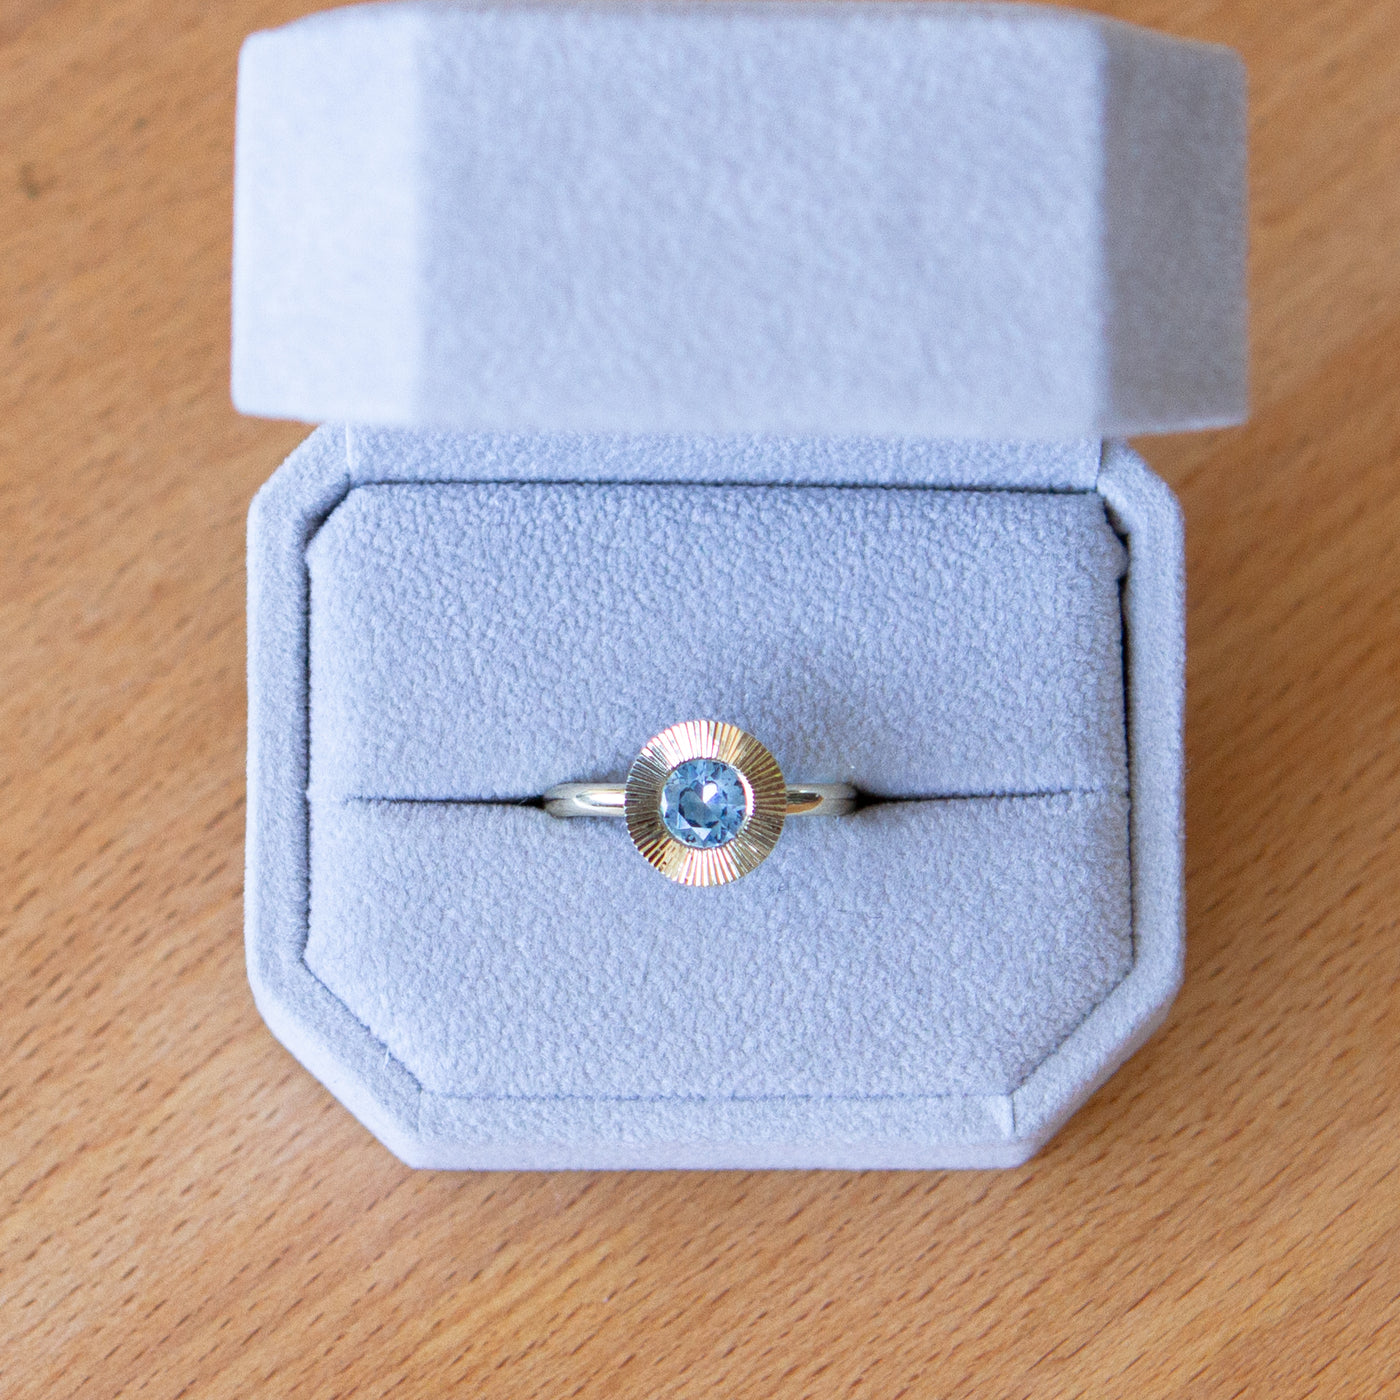 Round Medium Blue Montana sapphire in a 14k yellow gold Aurora ring with an engraved halo border in a ring box